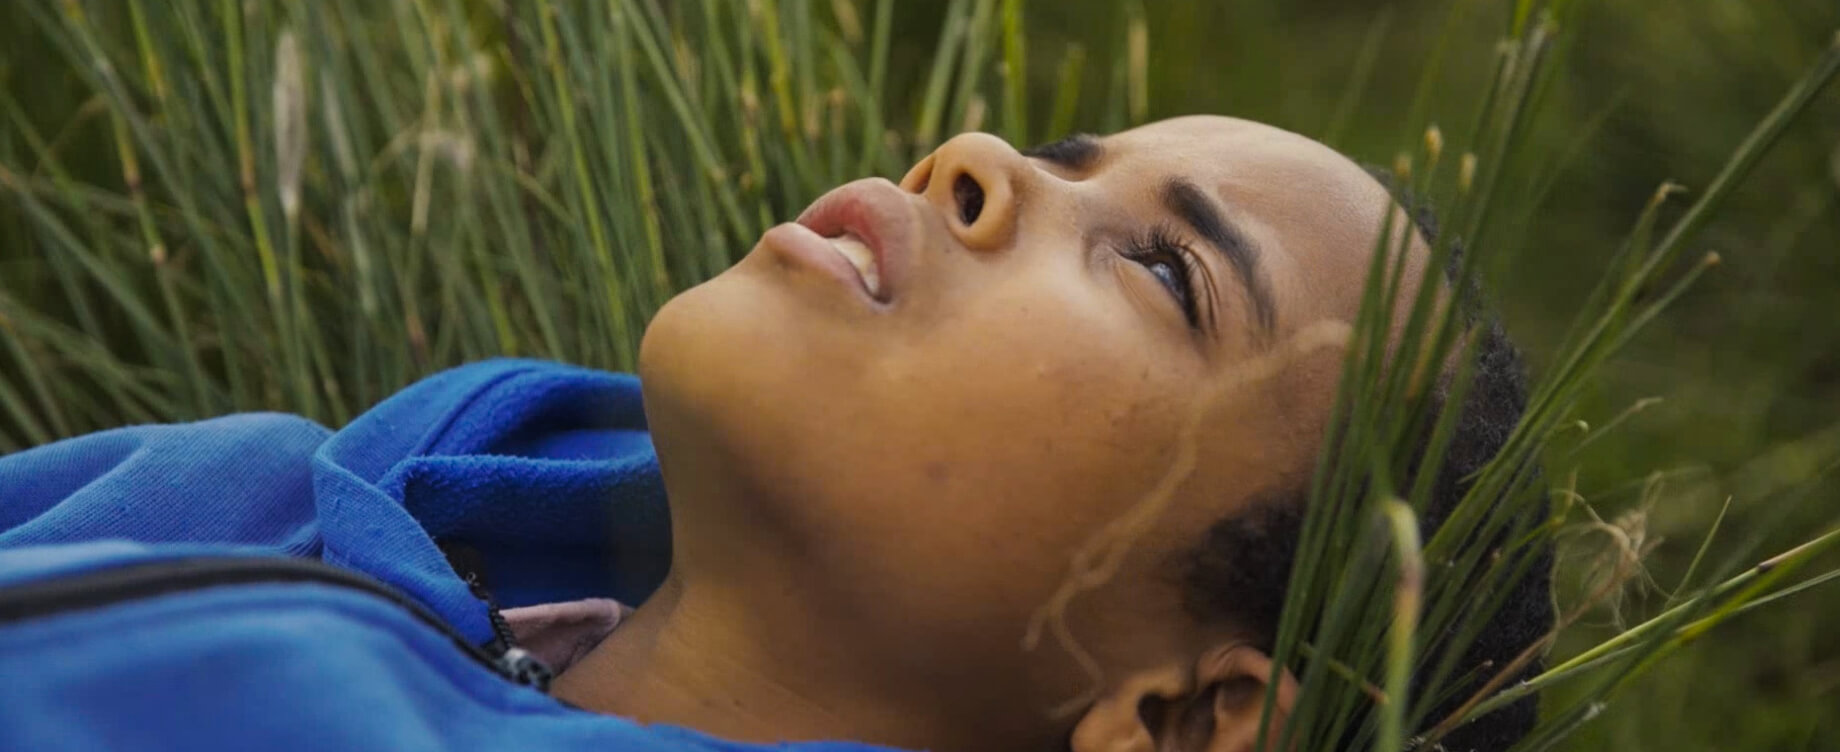 A young boy lying in the grass looks up at the sky.